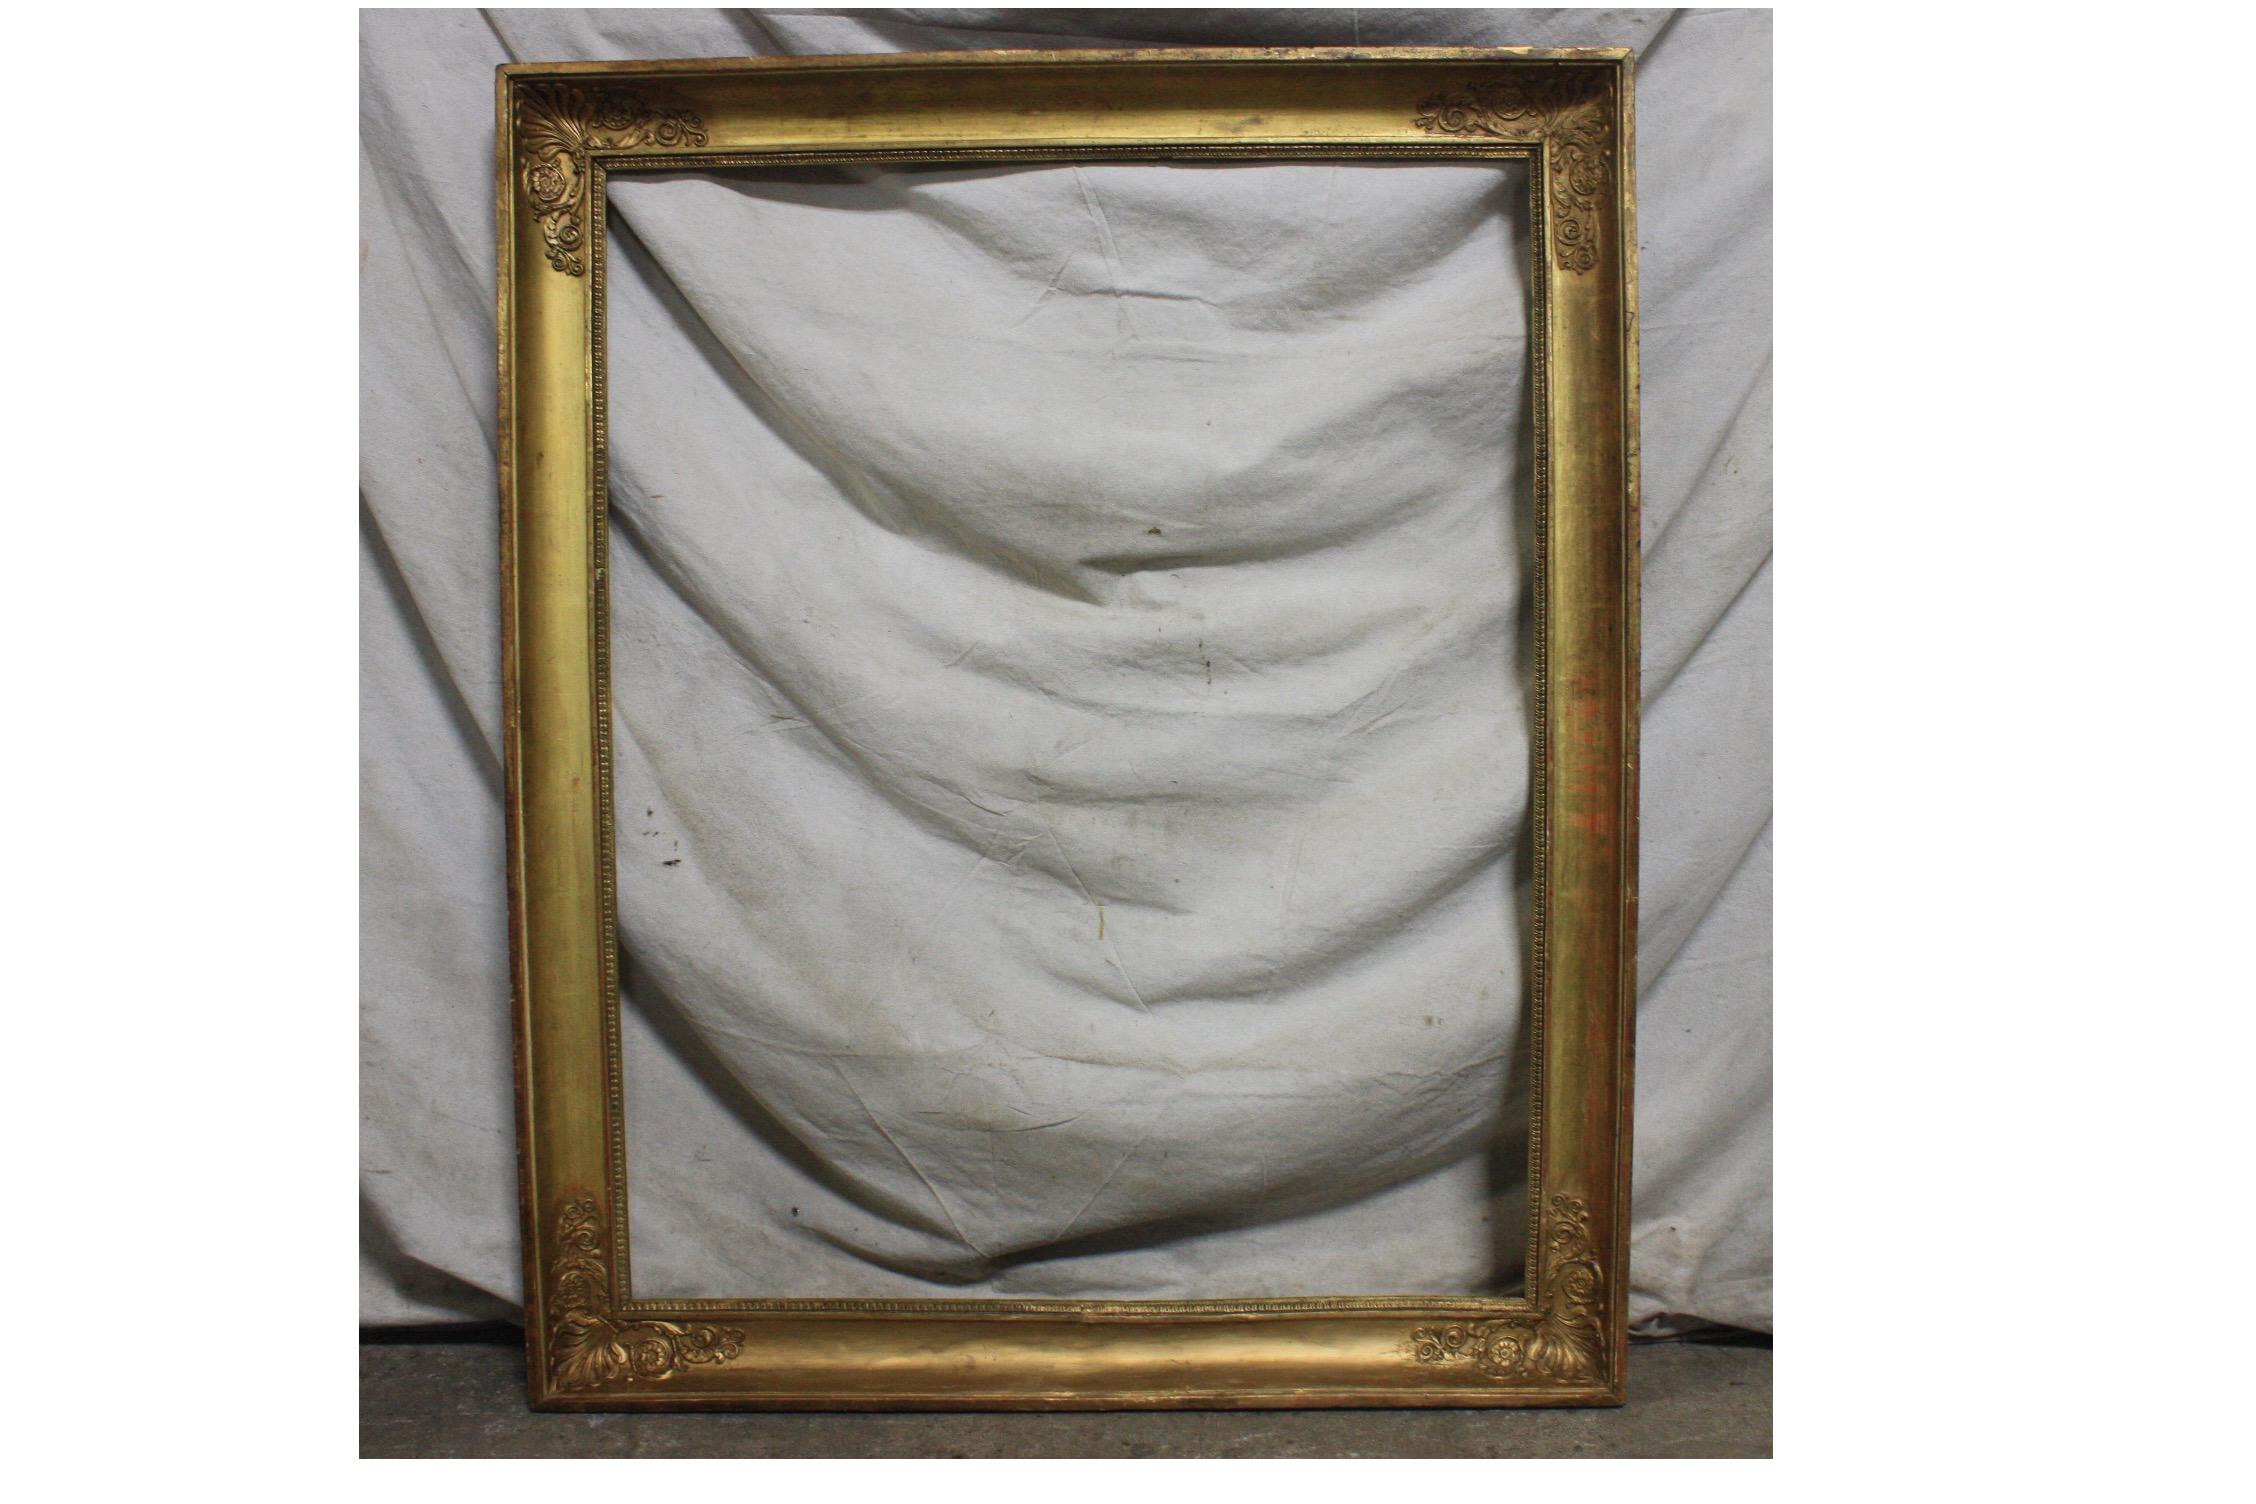 Early 19th century French giltwood frame.
The inside dimensions 
39.25 x 31.25